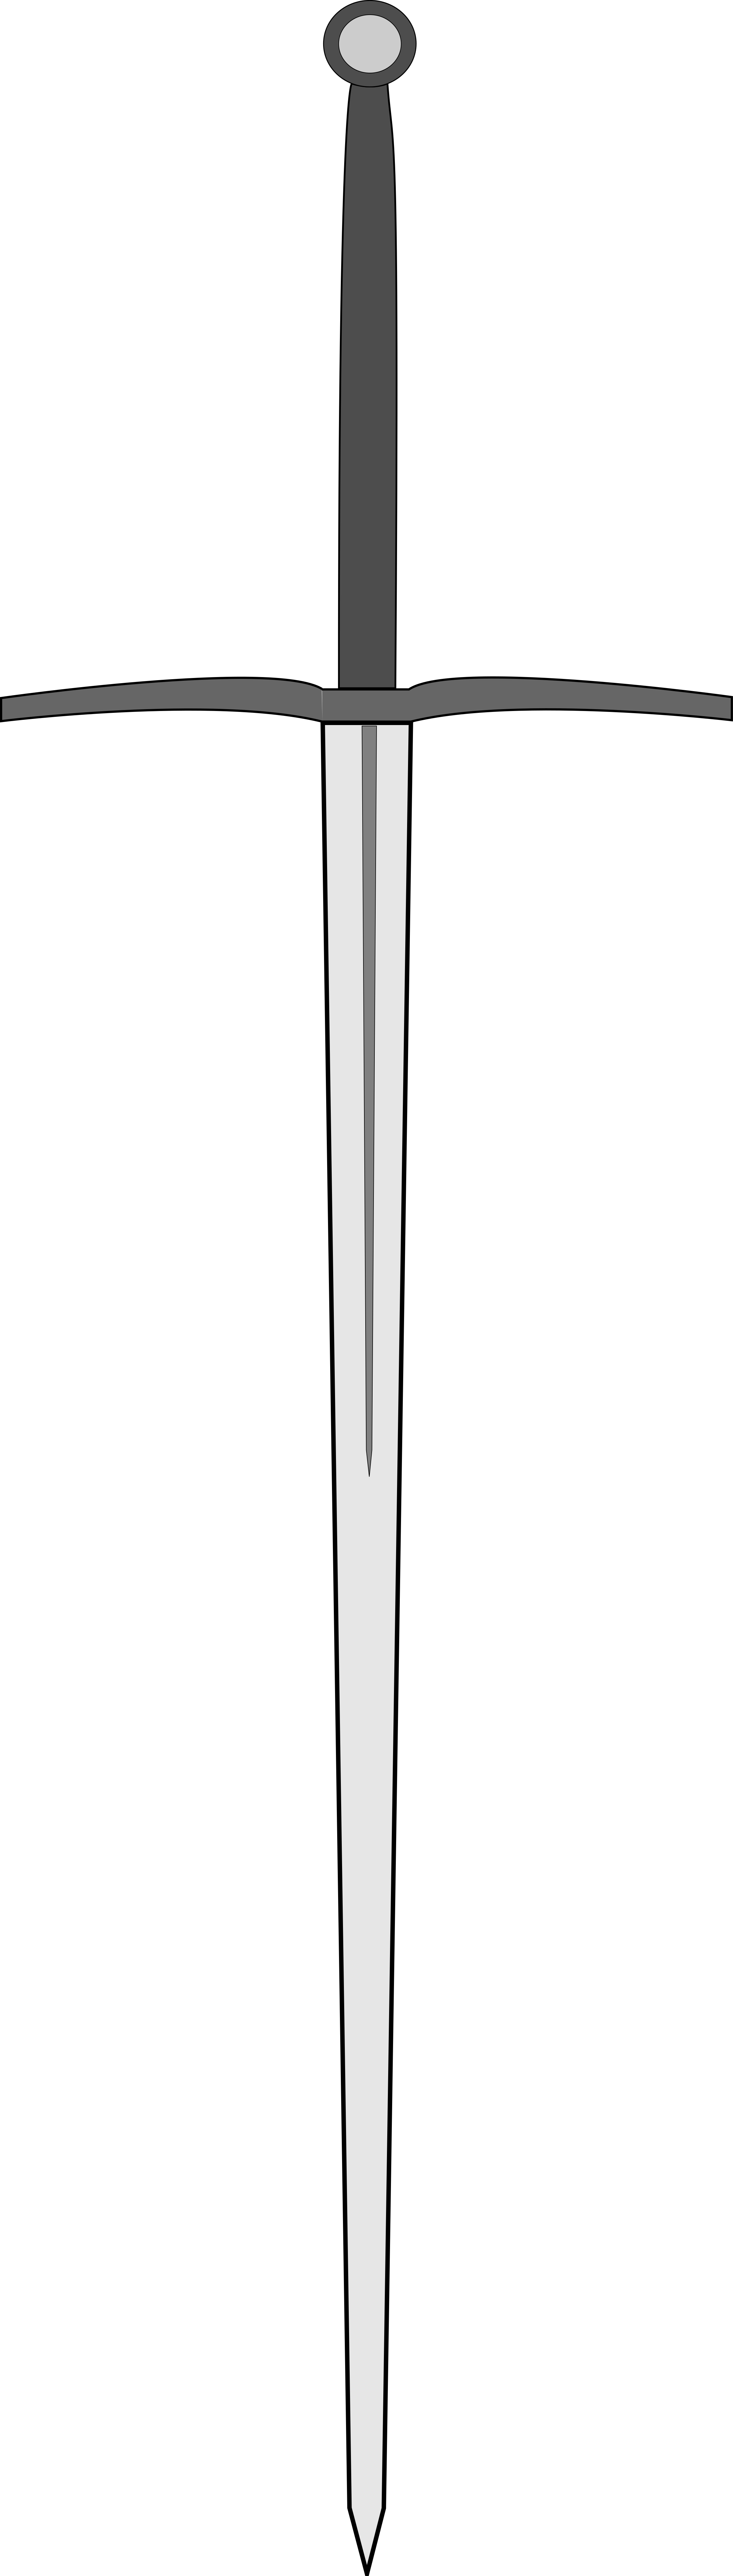 White clipart sword. Two handed